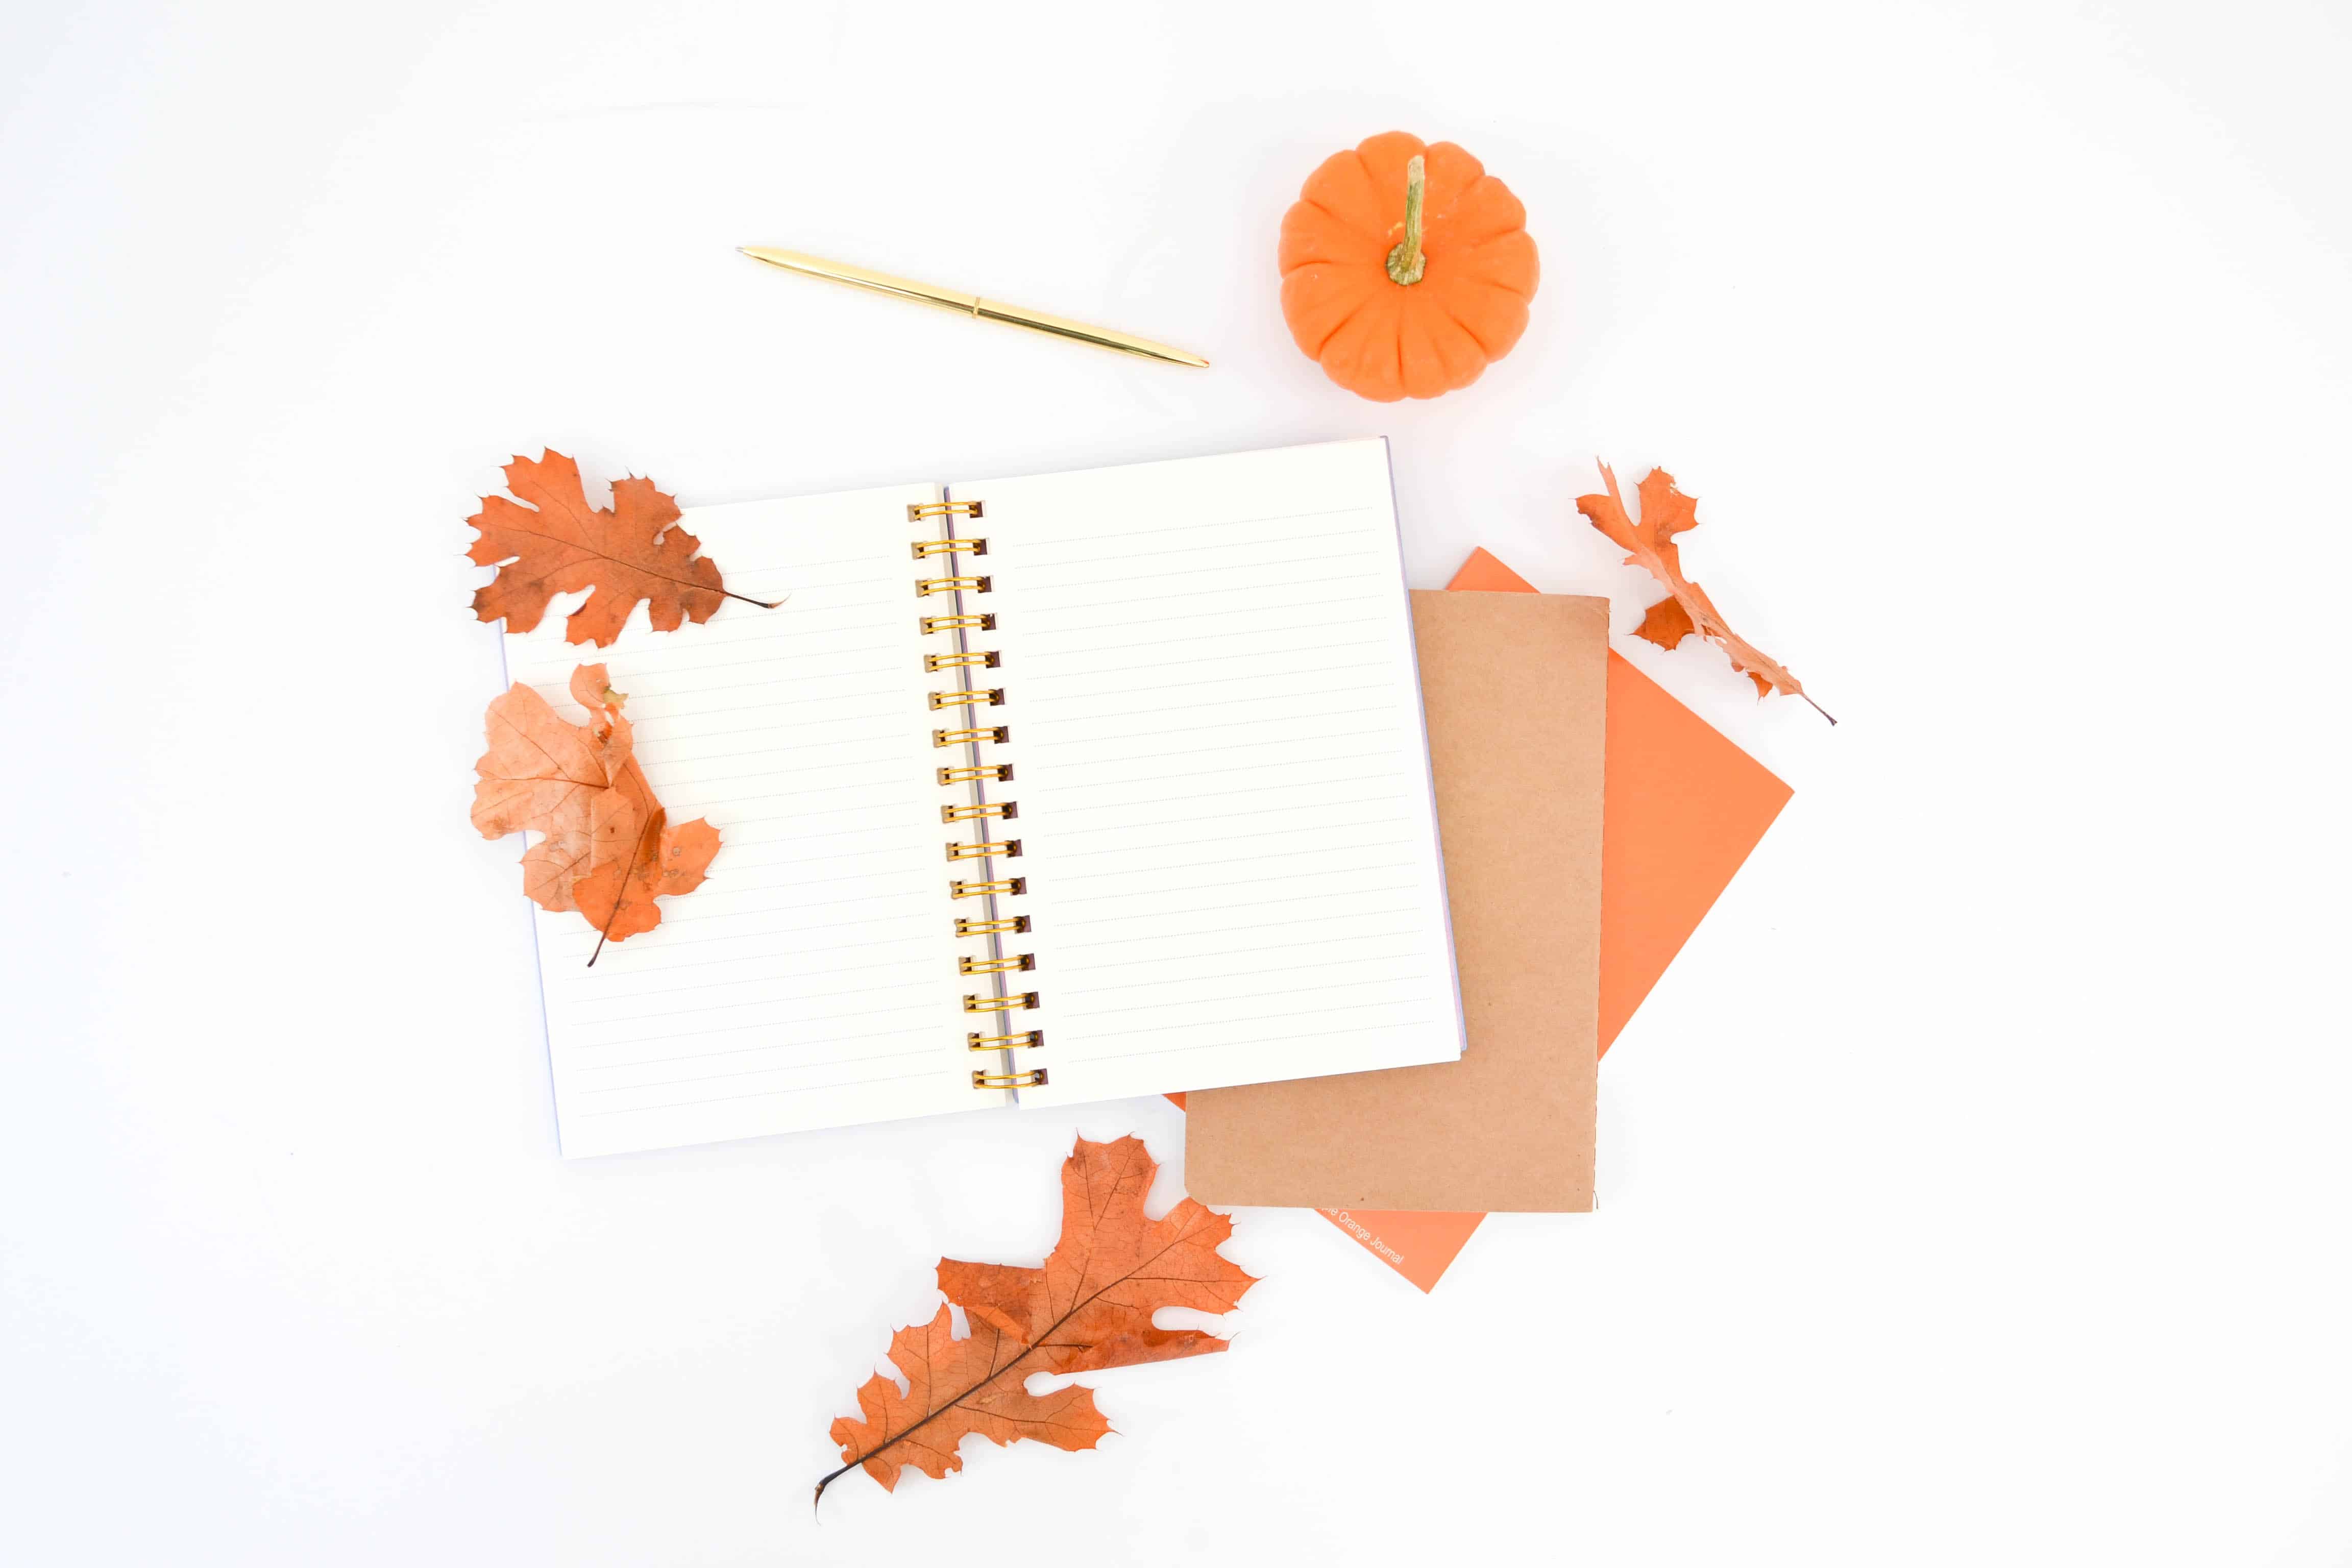 Using journaling prompts for depression and anxiety can help you stay focused and assess progress. Get journal writing ideas with monthly journal prompts delivered to you!